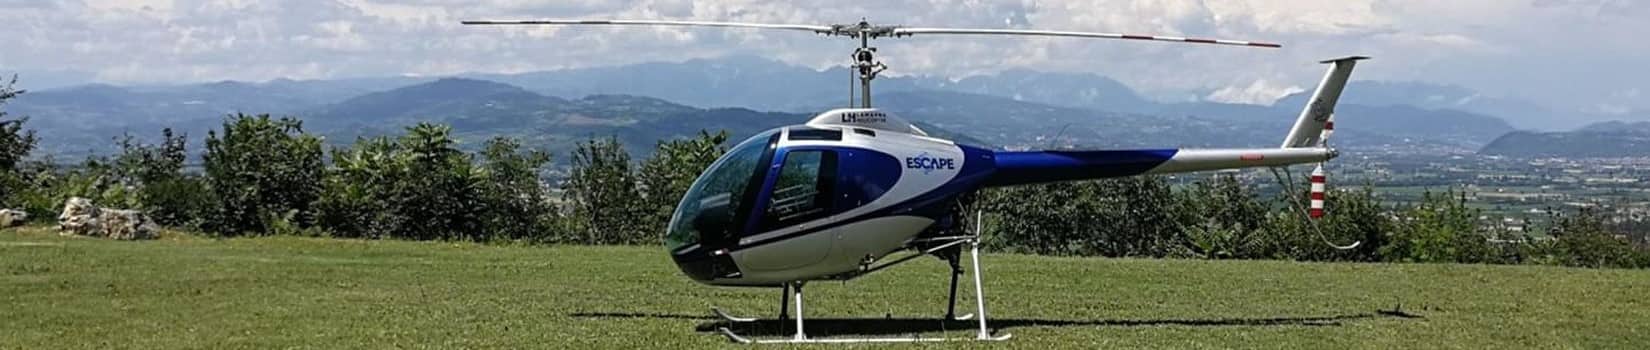 Lamanna Helicopters